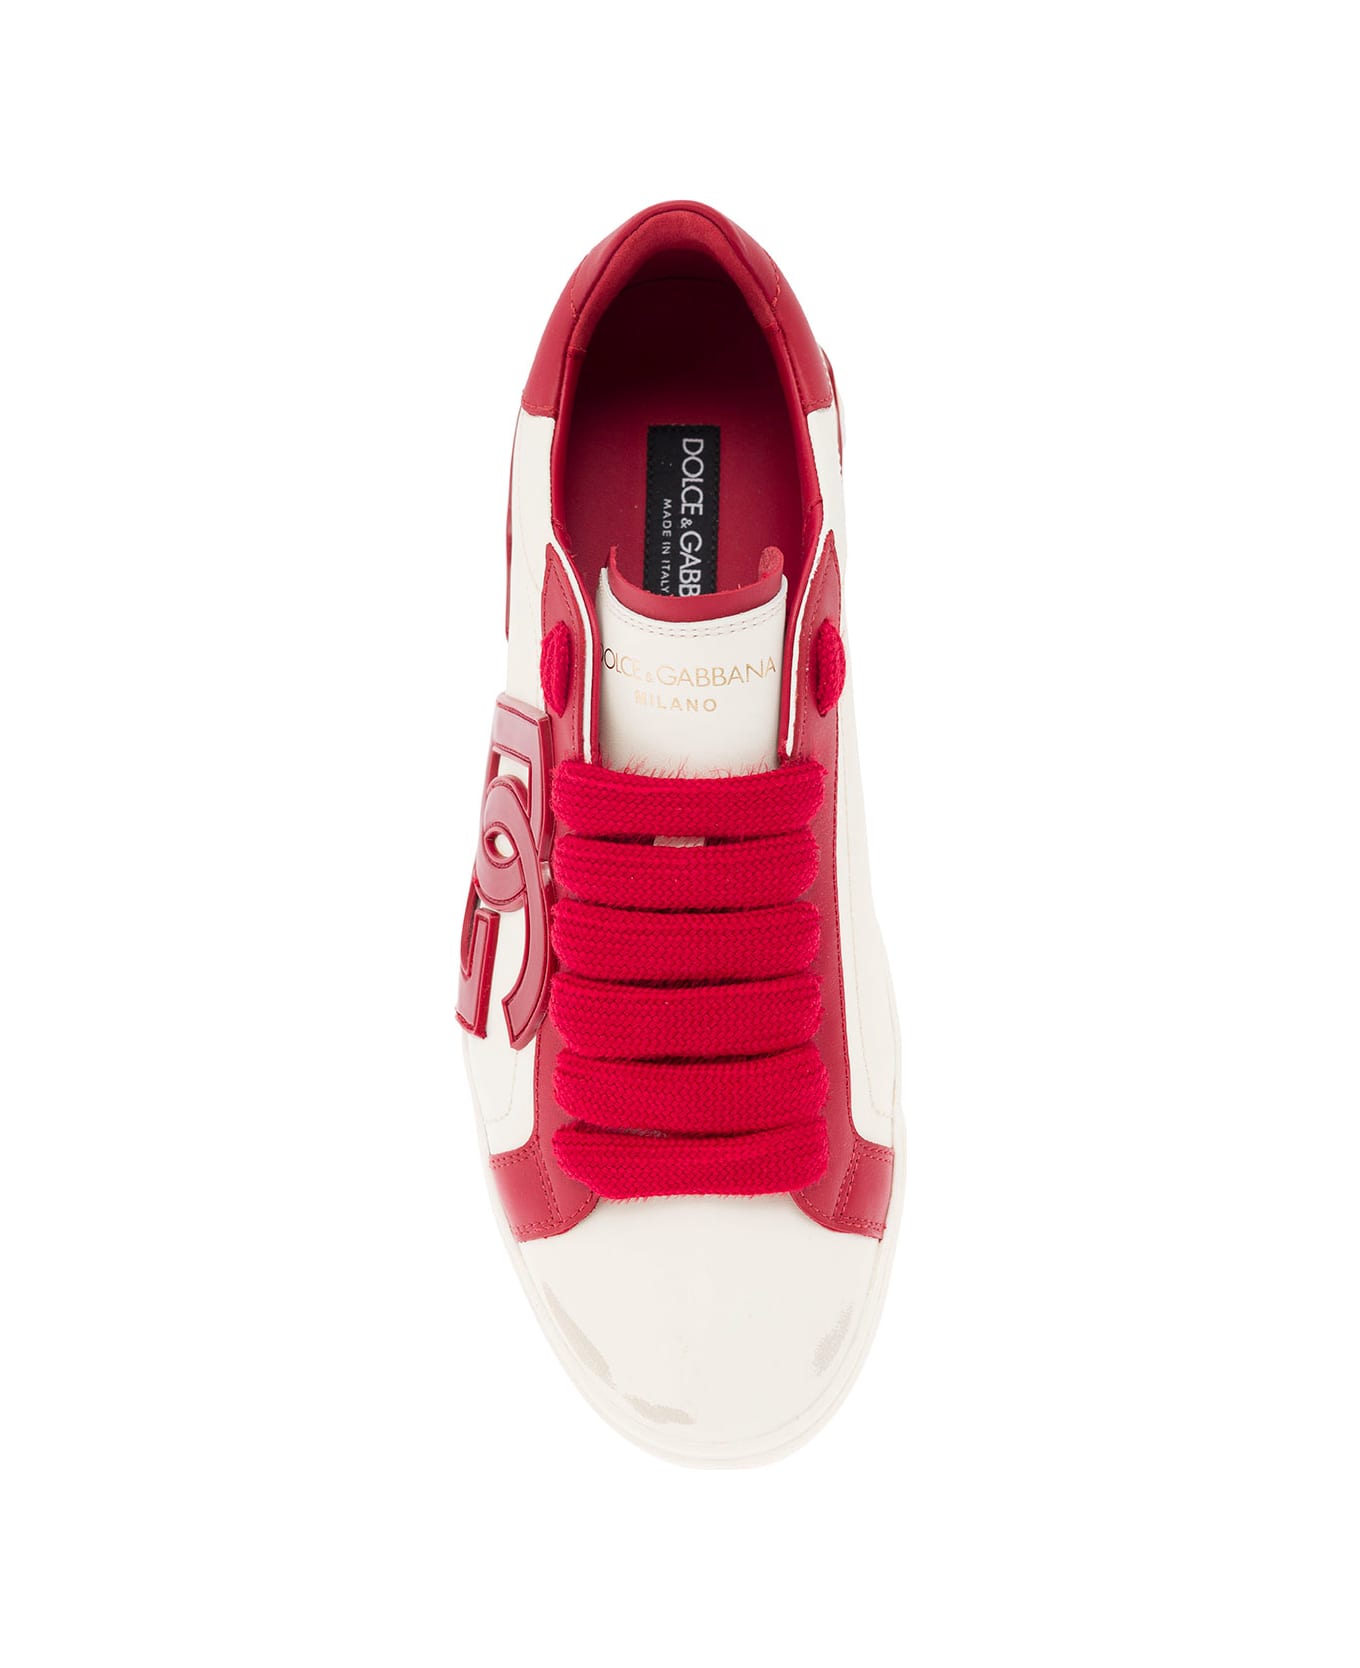 Dolce & Gabbana 'vintage Portafino' White And Red Low Top Sneakers With Dg Patch In Leather Man - Red スニーカー